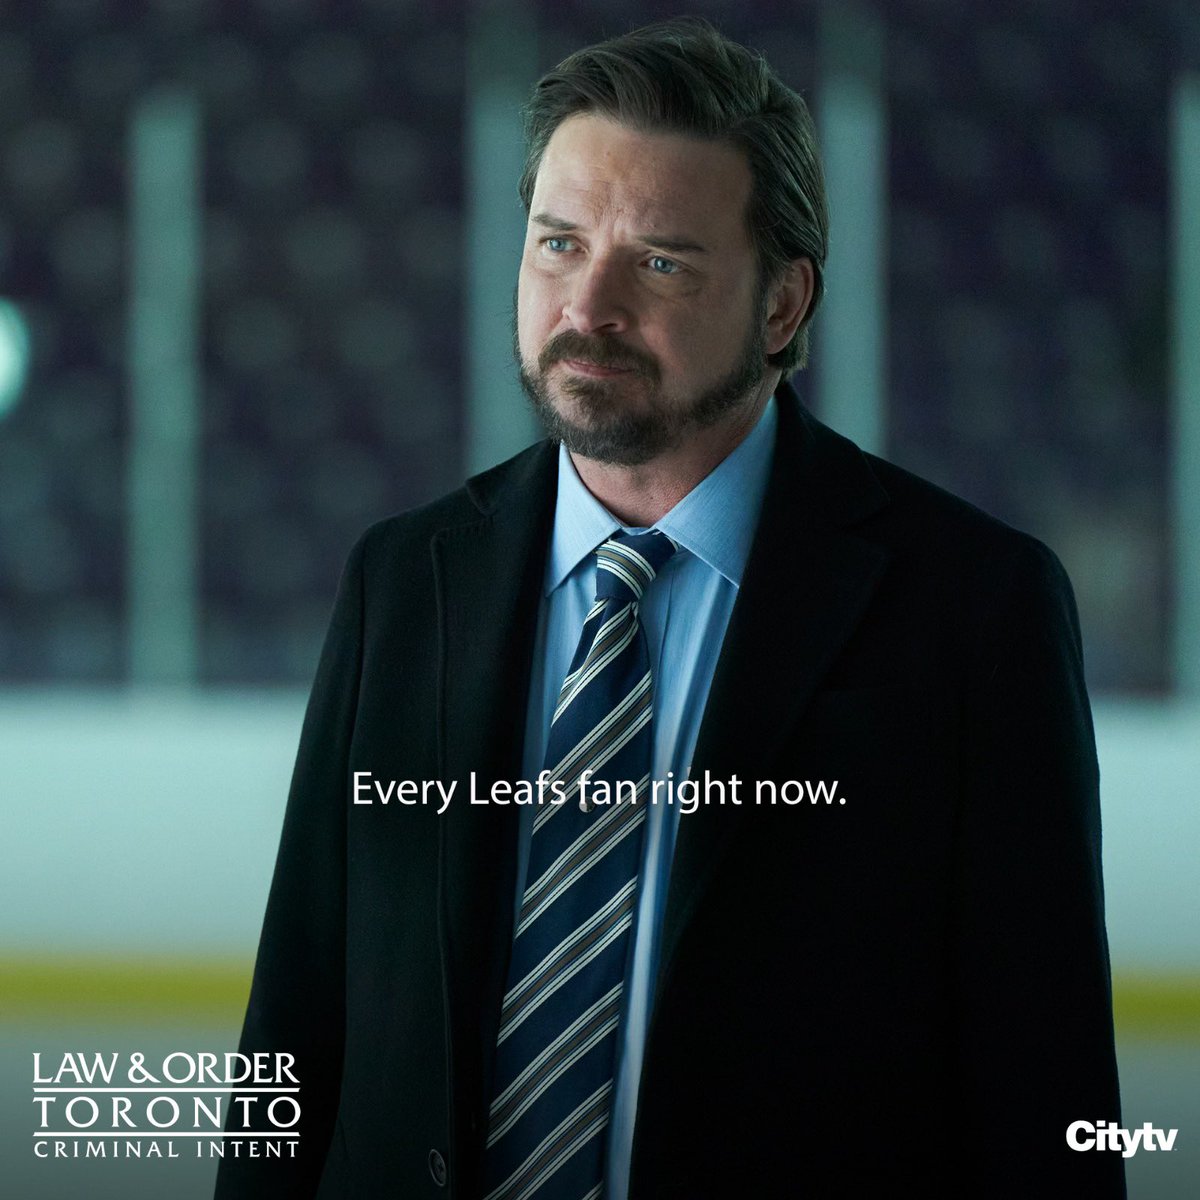 At least there’s more #LawandOrderToronto #CriminalIntent to watch. Don’t miss an all-new episode this Thursday at 8/7c on @city_tv or stream it on Citytv+